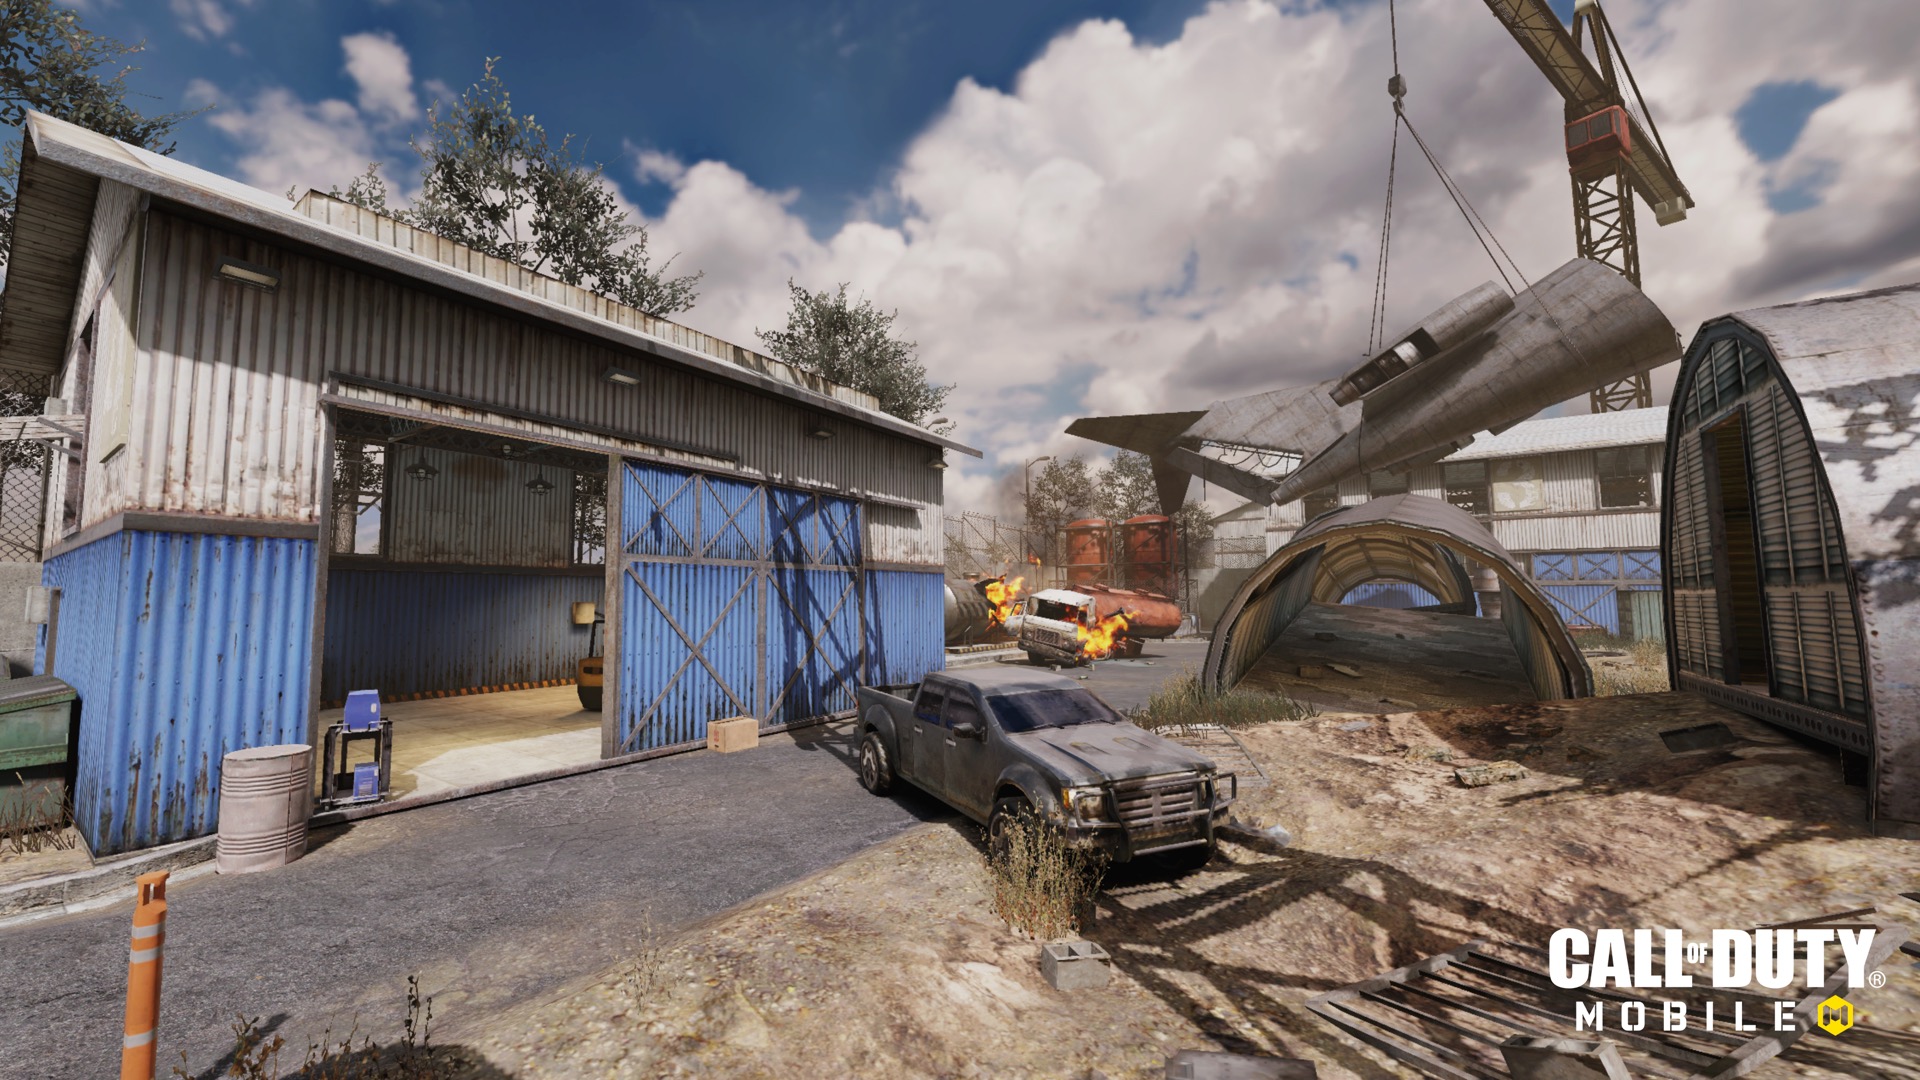 Call of Duty Mobile Season 3 teasers reveal new maps and modes TechRadar